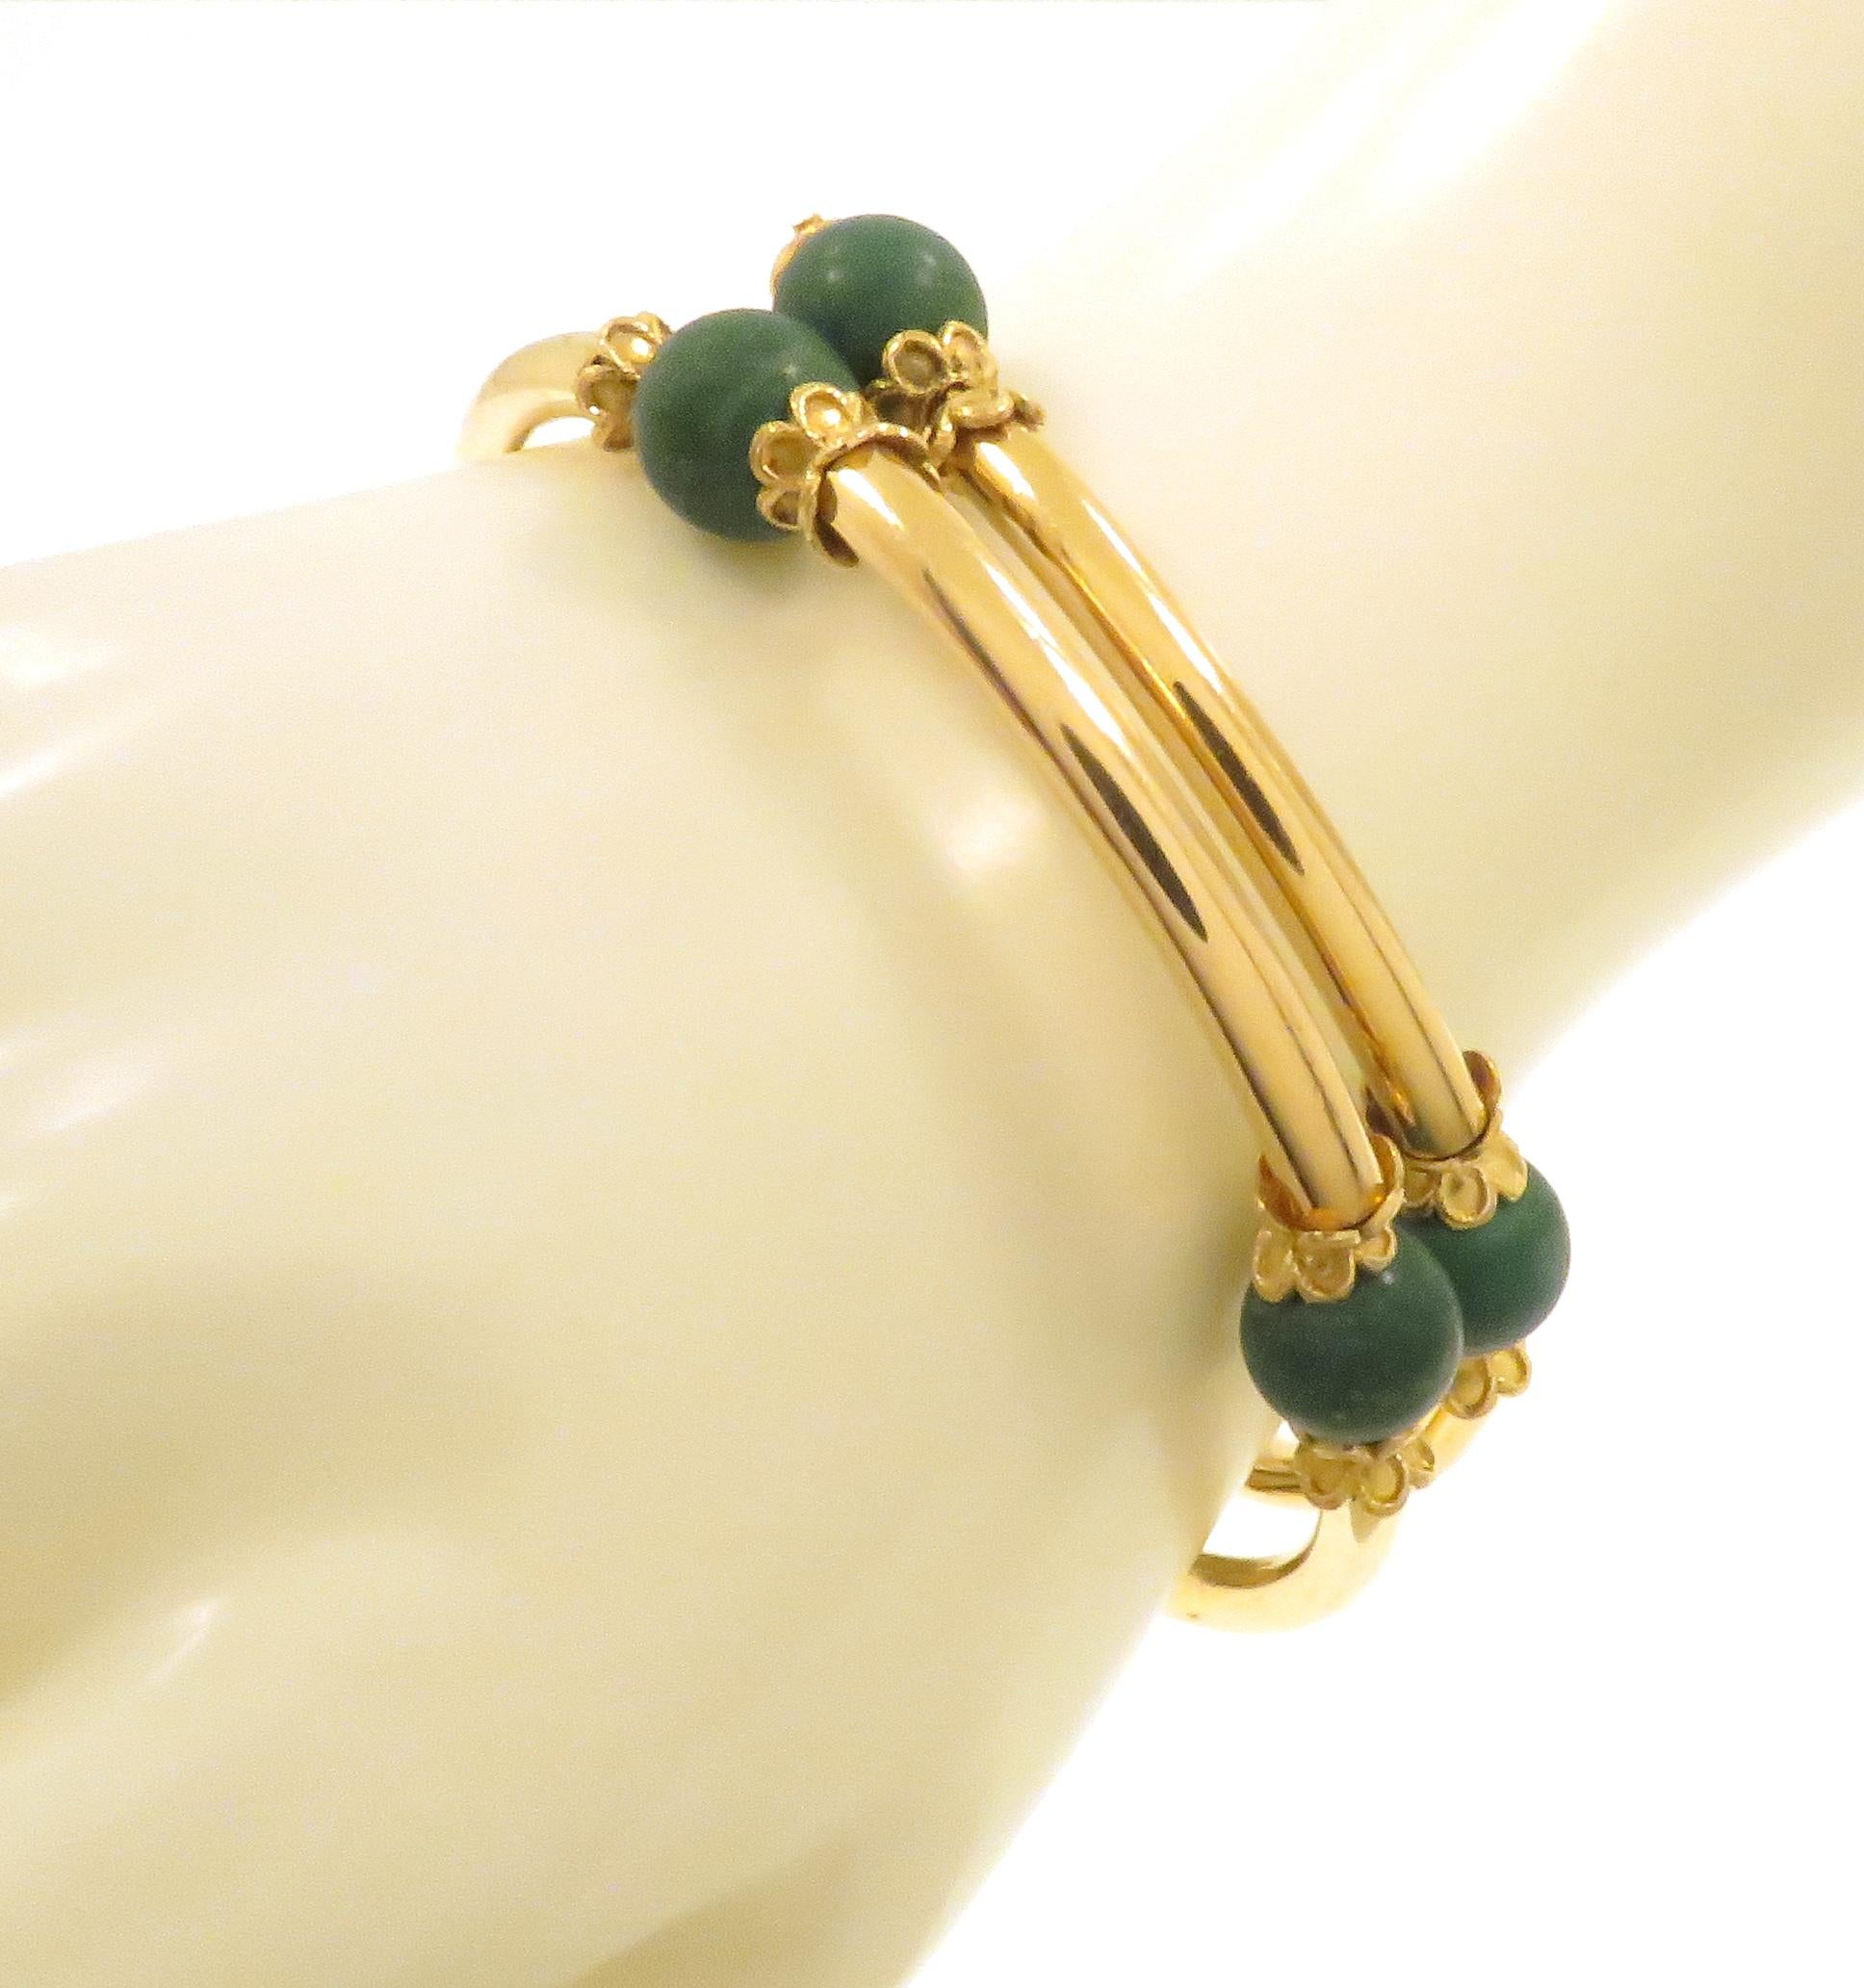 Vintage bracelet in 18k yellow gold with 8 green turquoise beads. The bracelet features a spiral of gold tube elements spaced by turquoise beads. The beads are decorated by petal sharpened little cups. A spring gold wire flows inside the bracelet